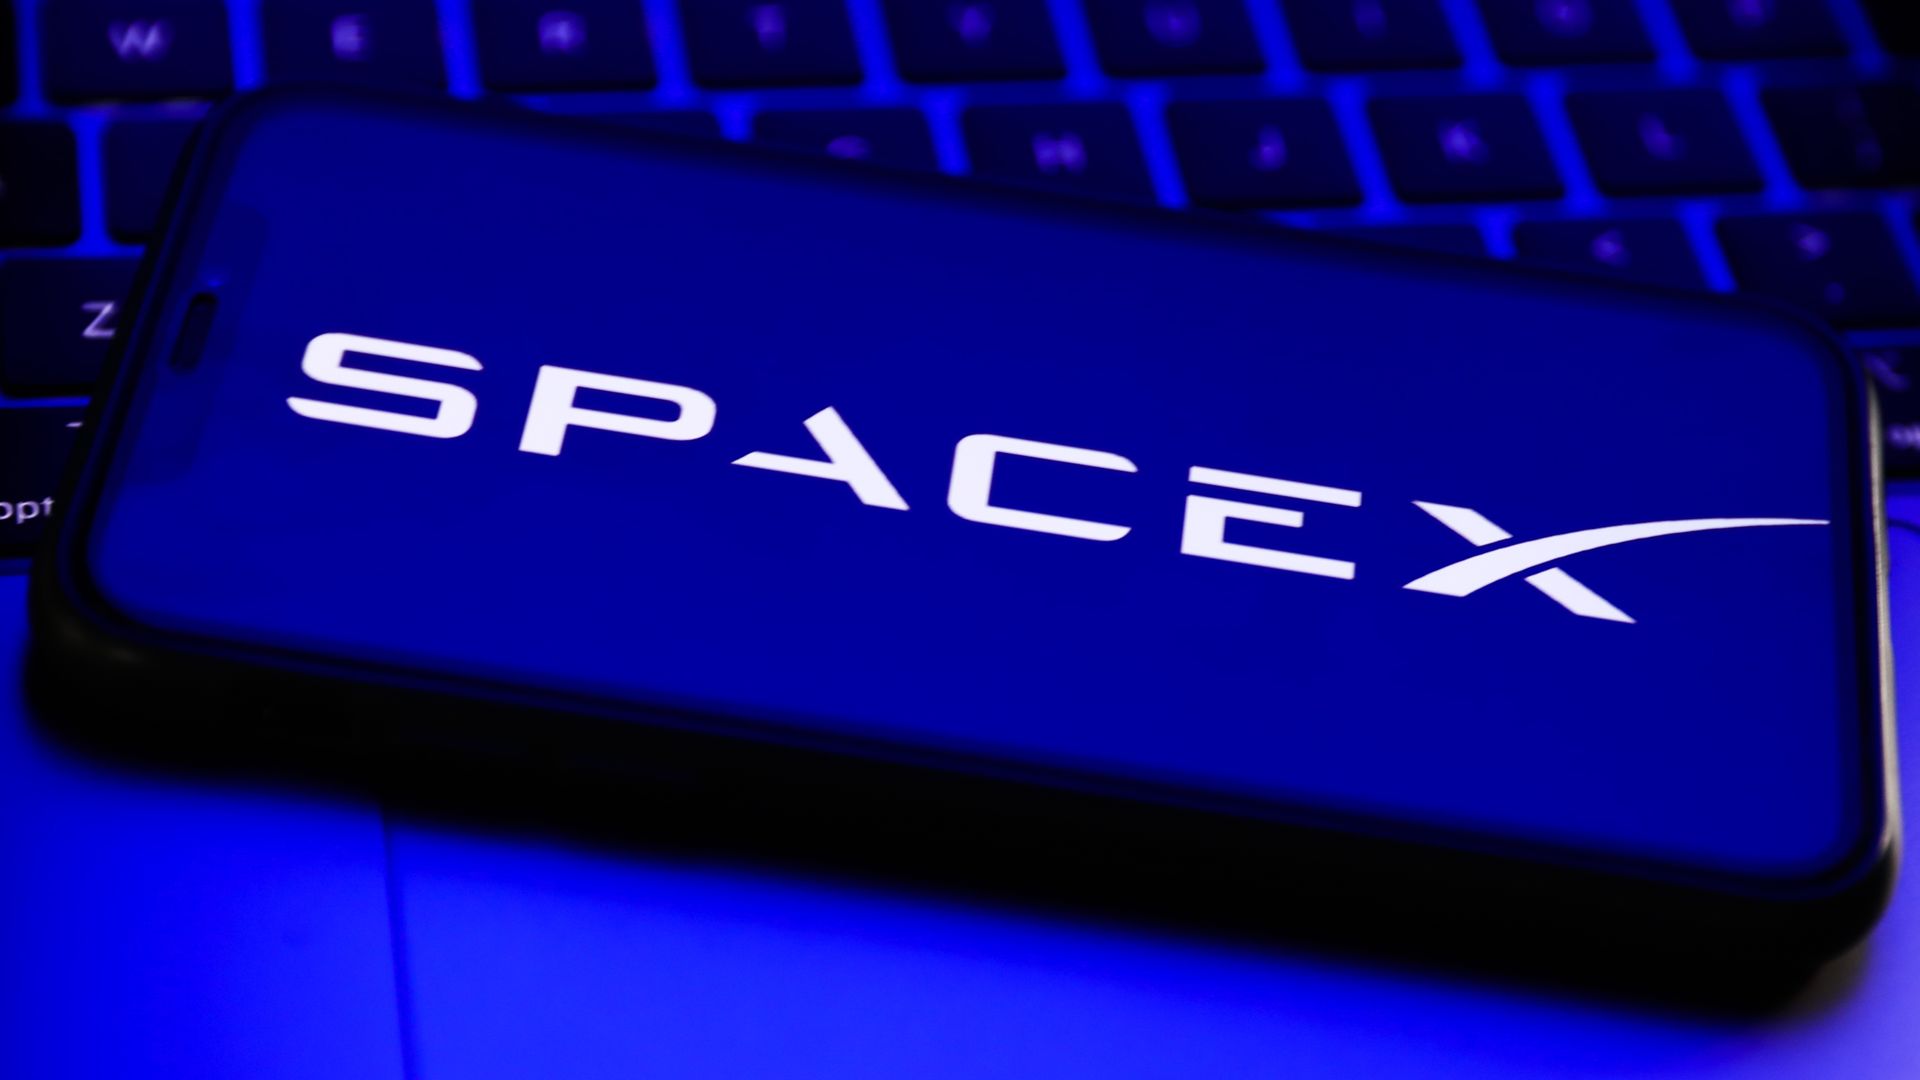 SpaceX and the European Space Agency recently signed an agreement for two launches next year, each carrying two Galileo satellites, Javier Benedicto, the agency's director of navigation said. The agreement calls for the satellites to be launched on SpaceX's Falcon 9 rocket from the U.S., he added.